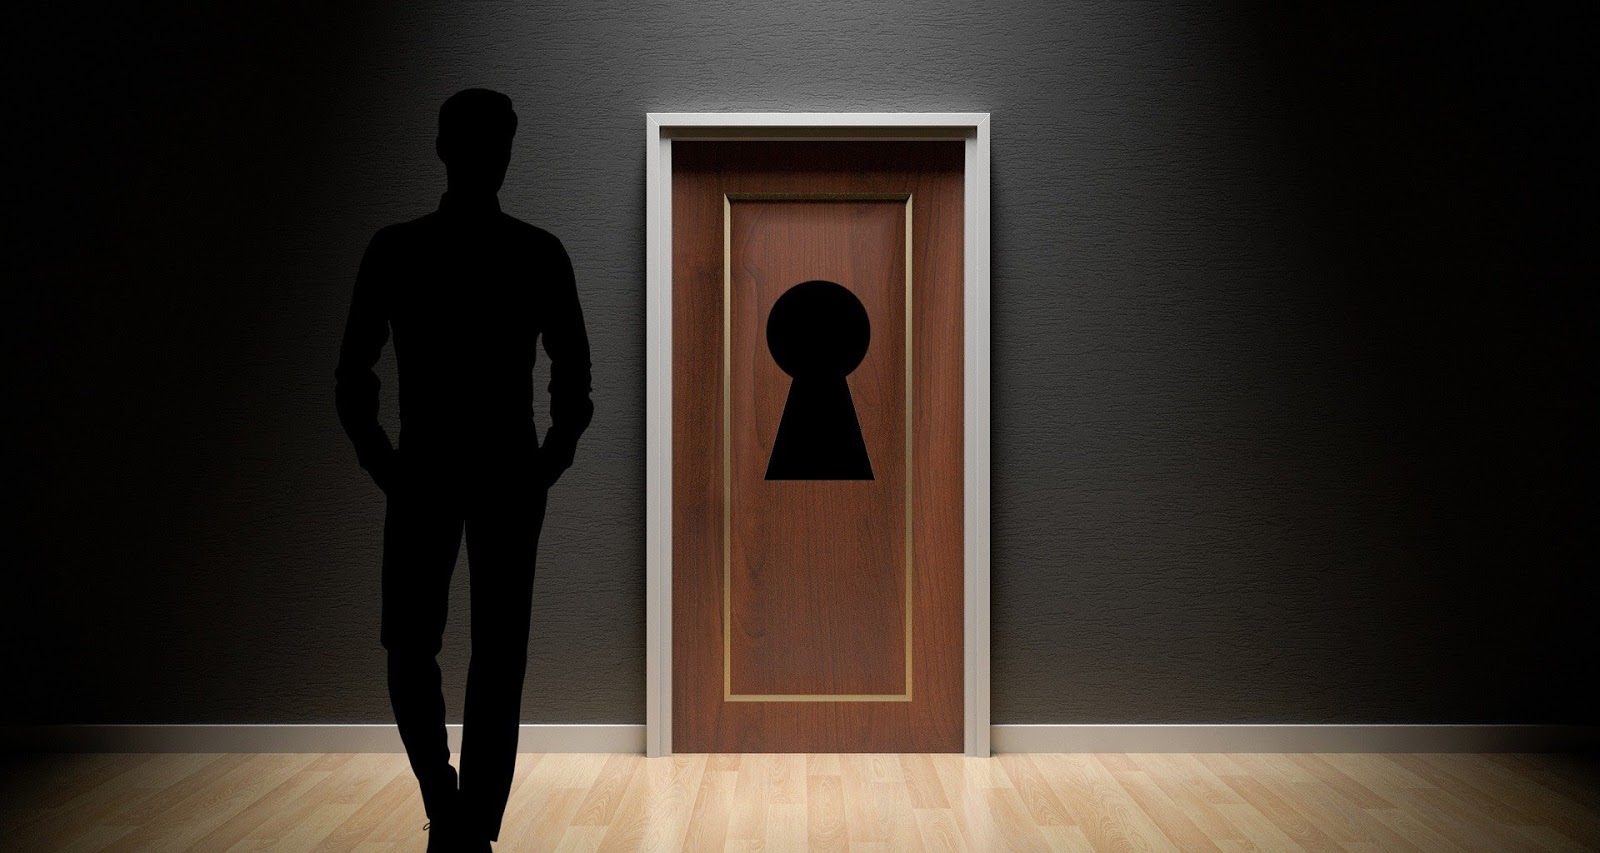 an image of a person's shadow standing in front of a door with a key hole